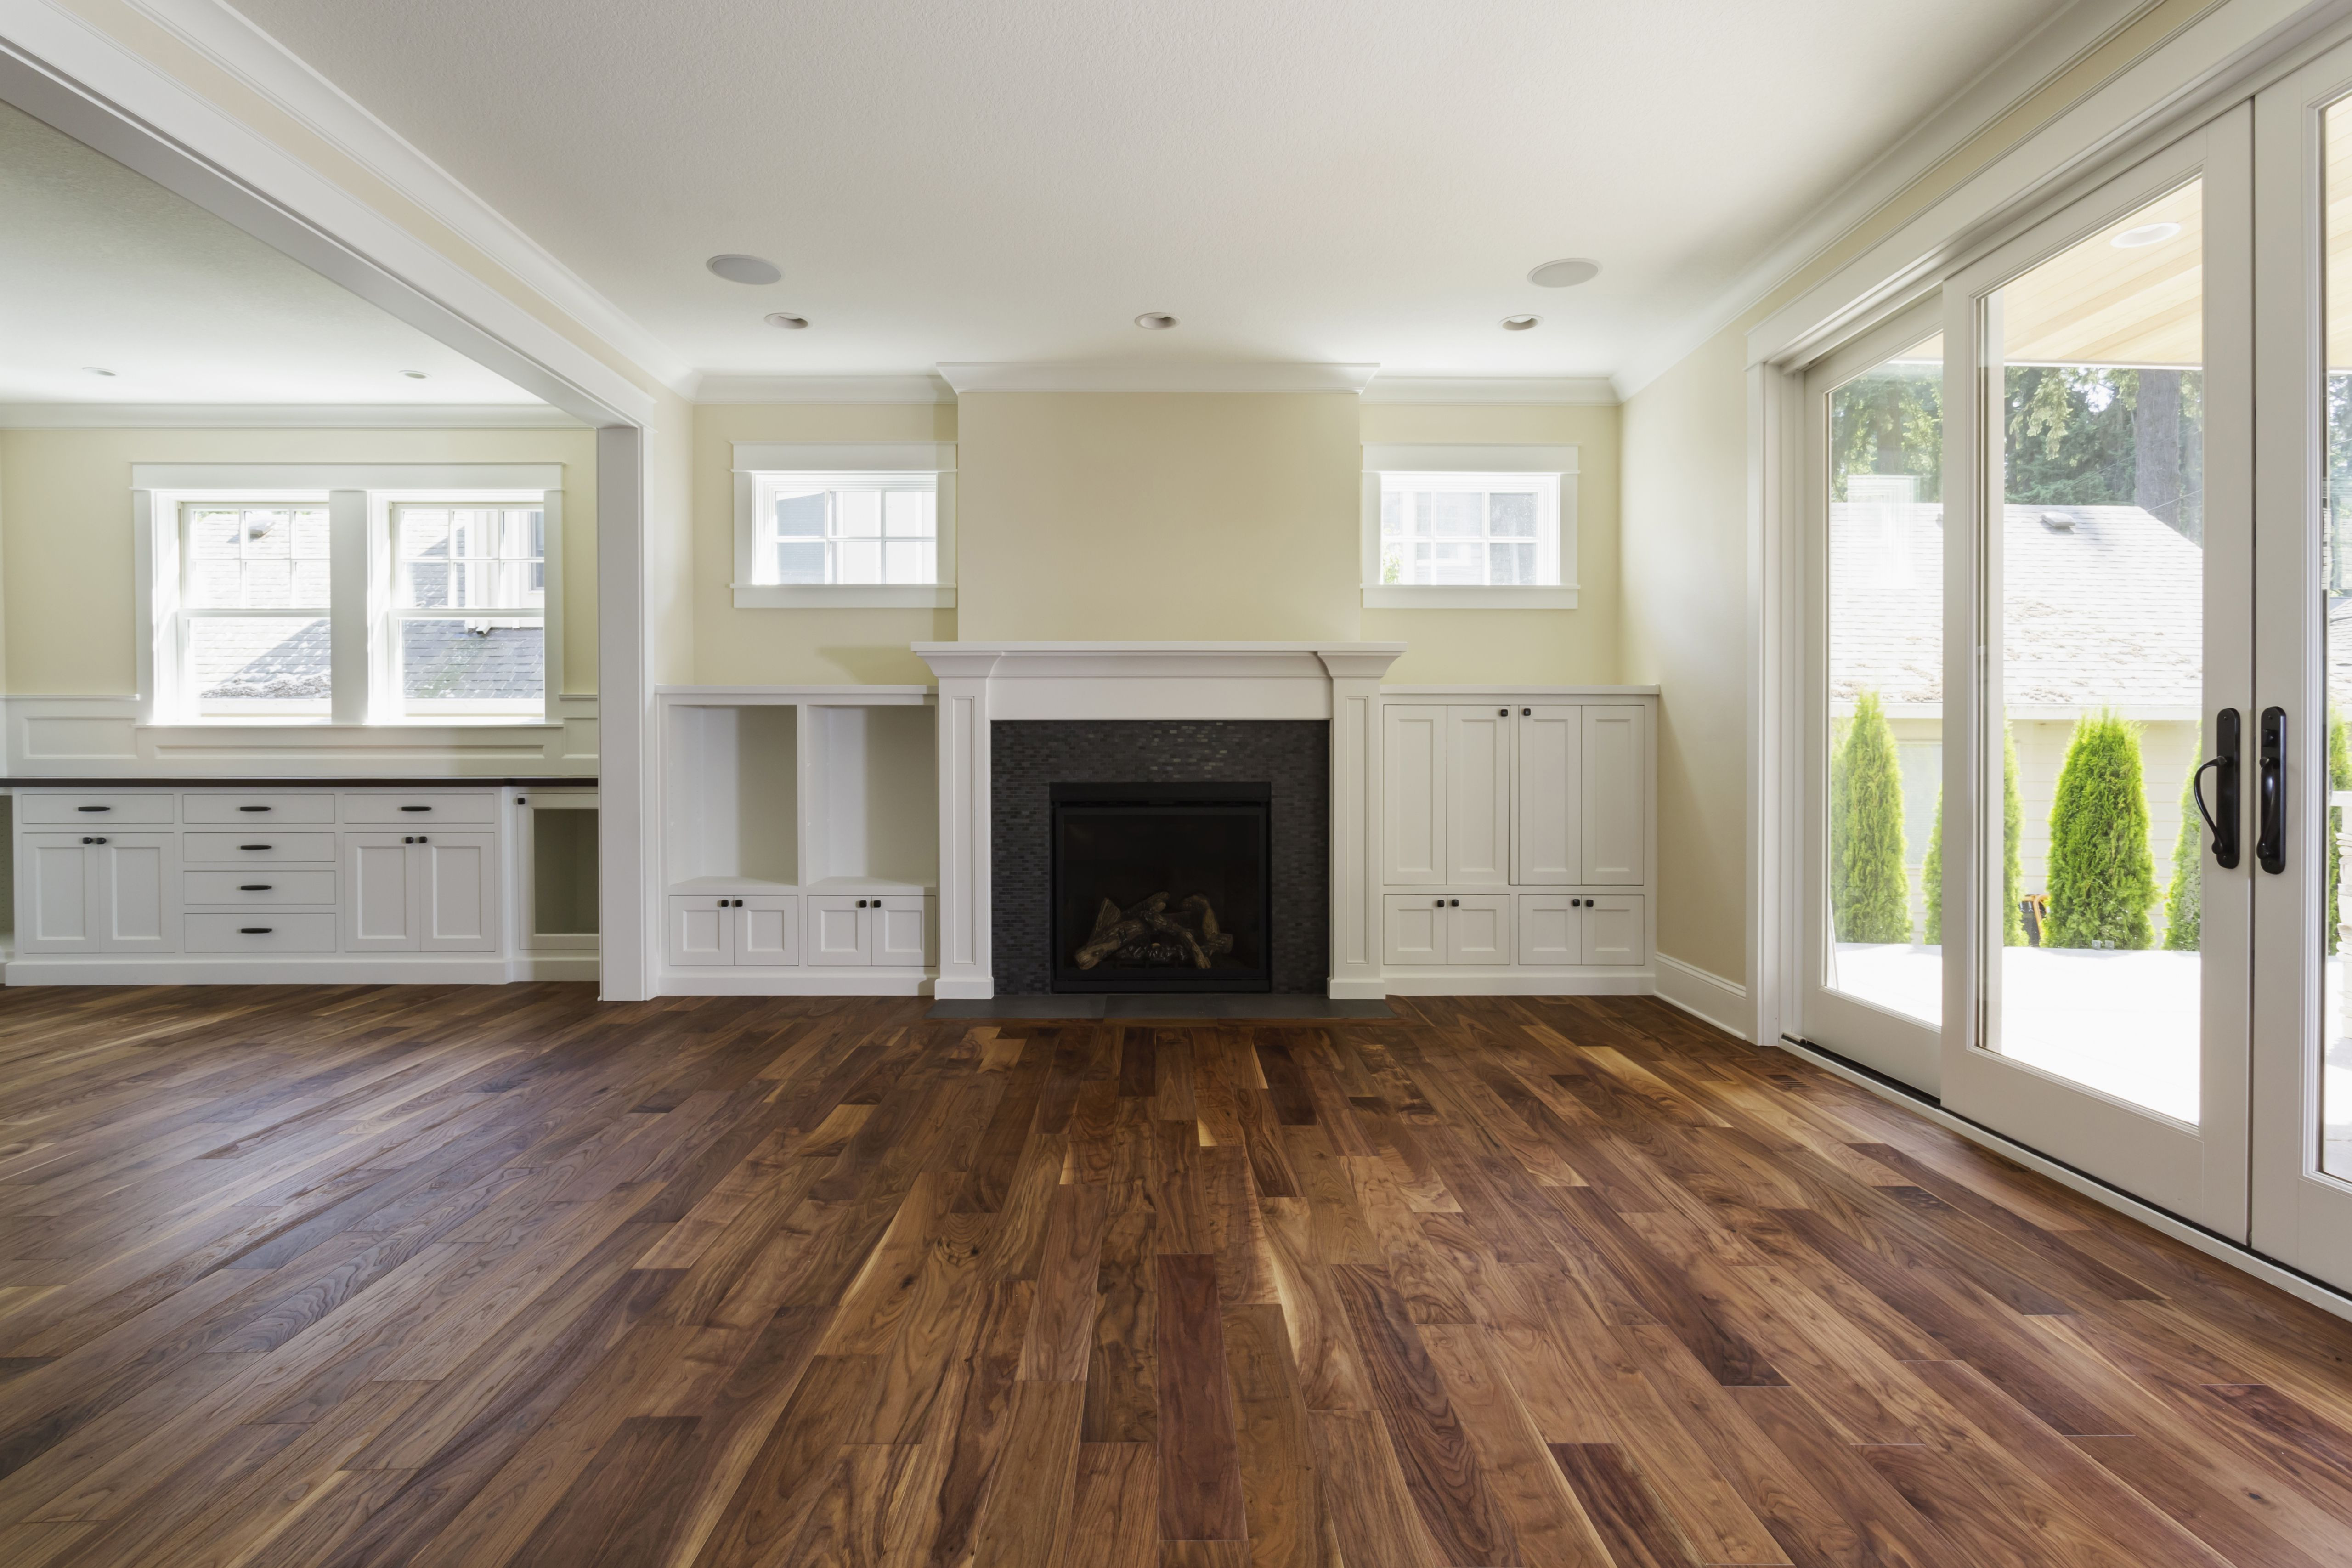 24 Lovely Types Of Sanders for Hardwood Floors 2024 free download types of sanders for hardwood floors of the pros and cons of prefinished hardwood flooring pertaining to fireplace and built in shelves in living room 482143011 57bef8e33df78cc16e035397